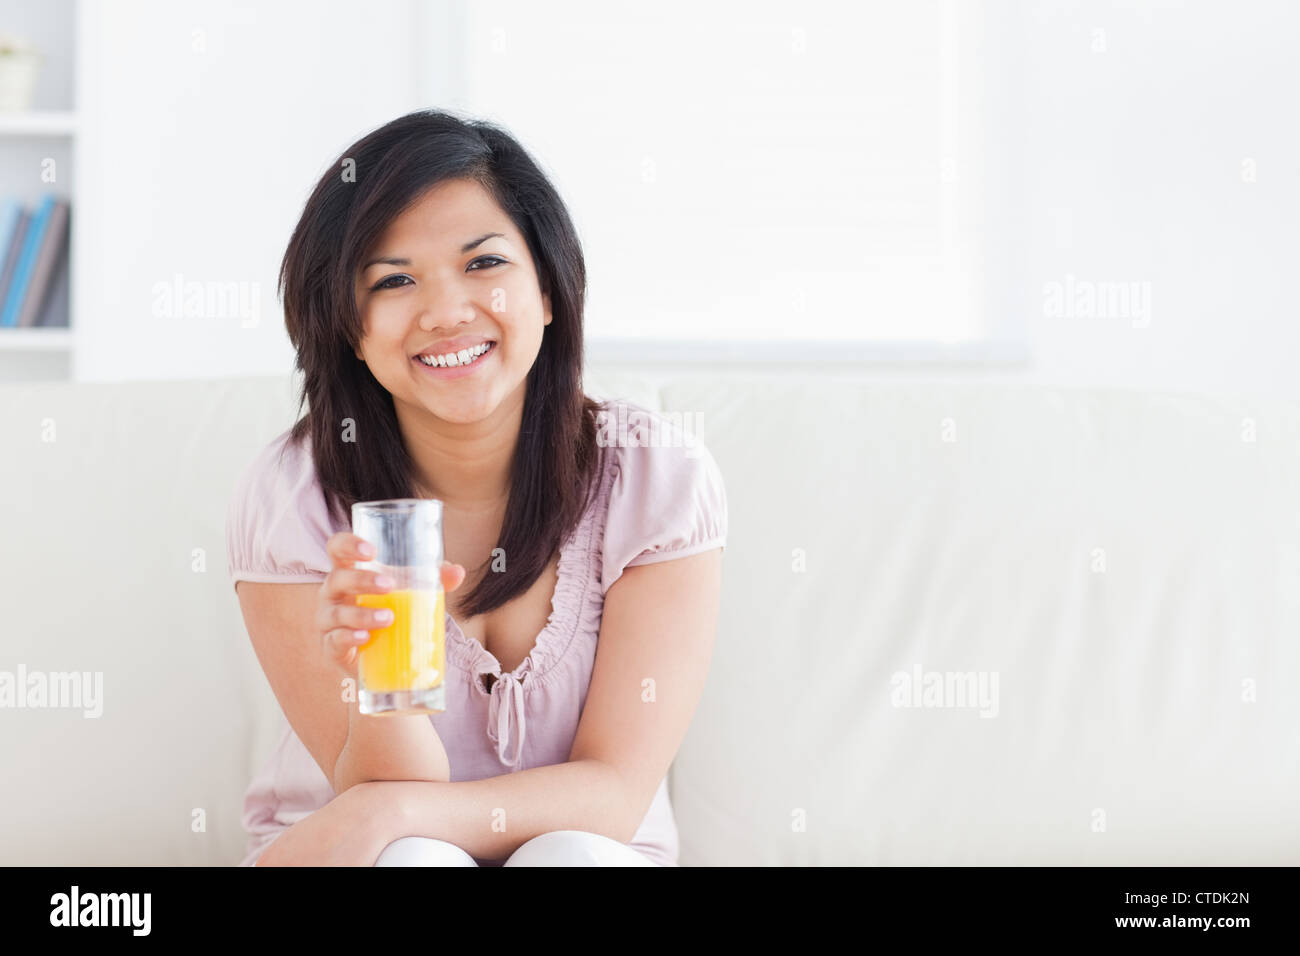 Woman smiling and sitting in a couch while holding a glass of orange juice Stock Photo